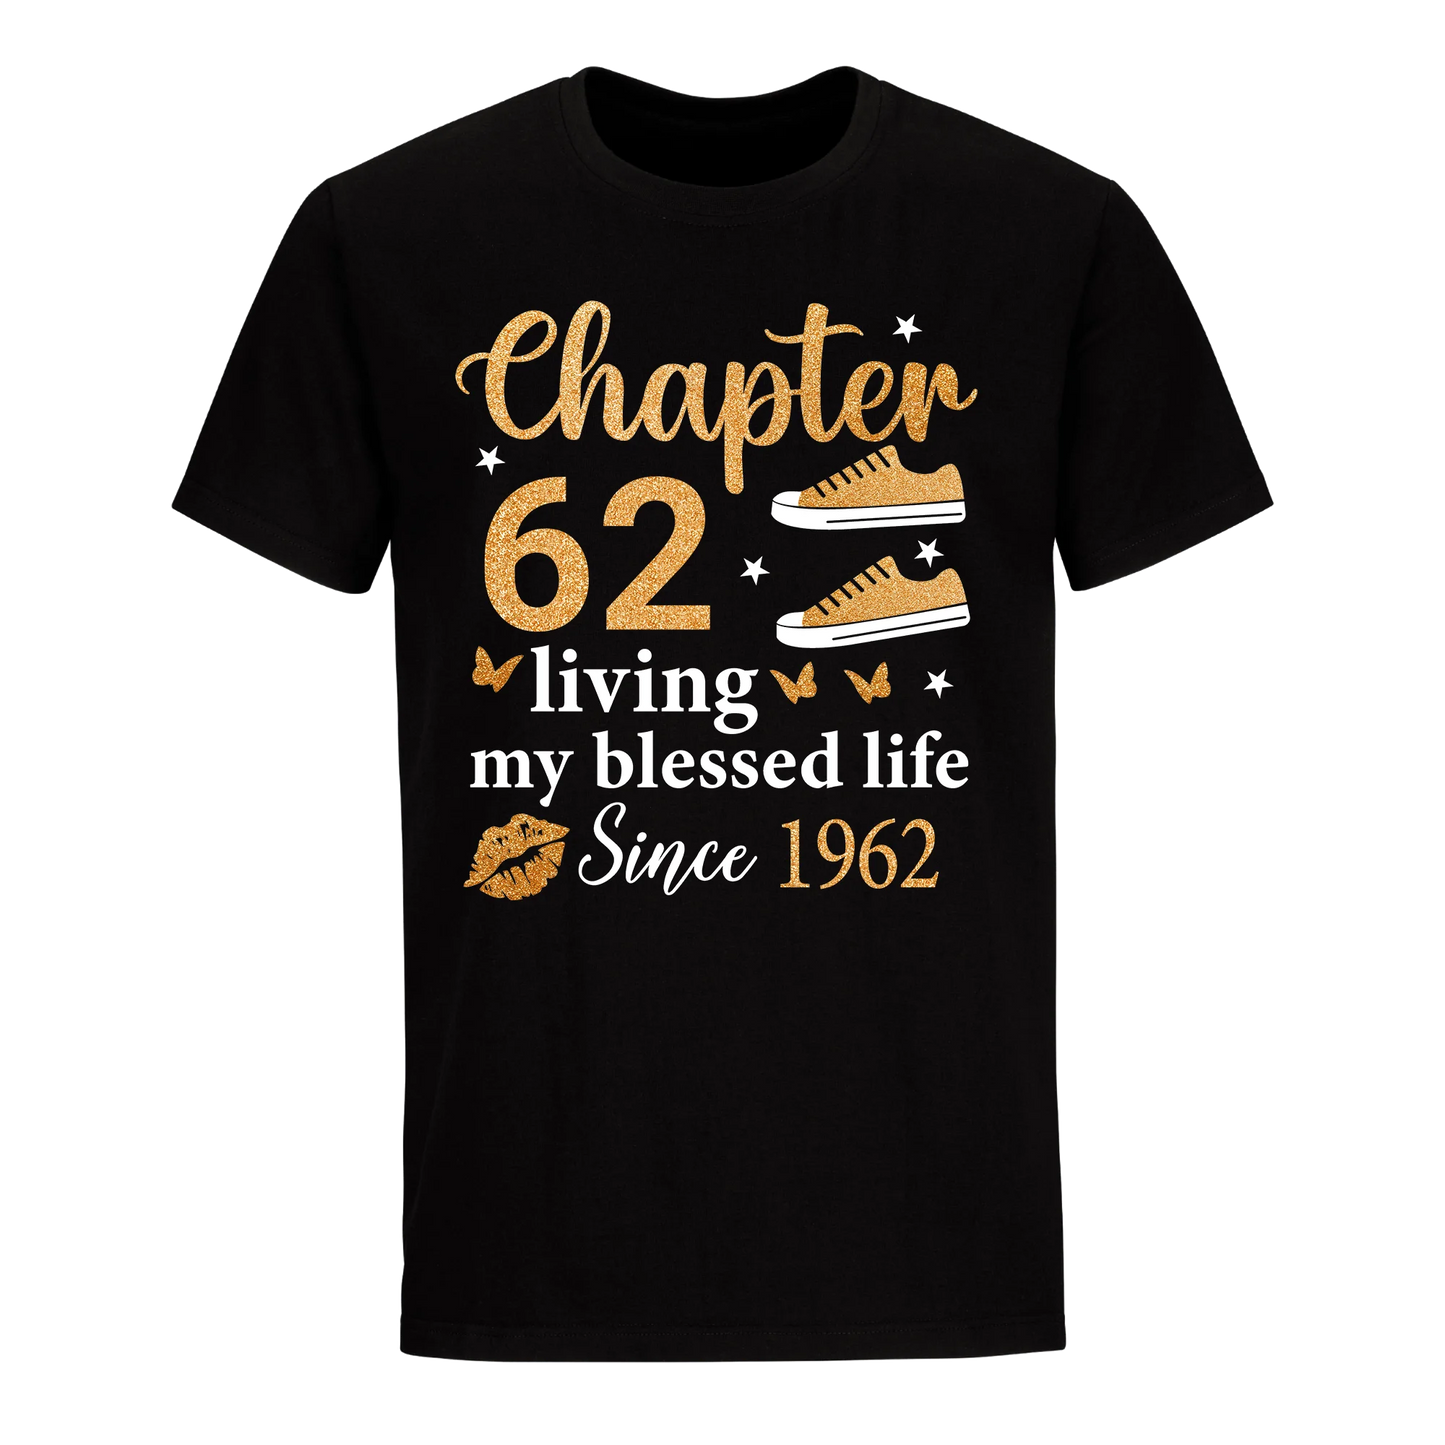 CHAPTER 62ND LIVING MY BLESSED LIFE SINCE 1962 UNISEX SHIRT